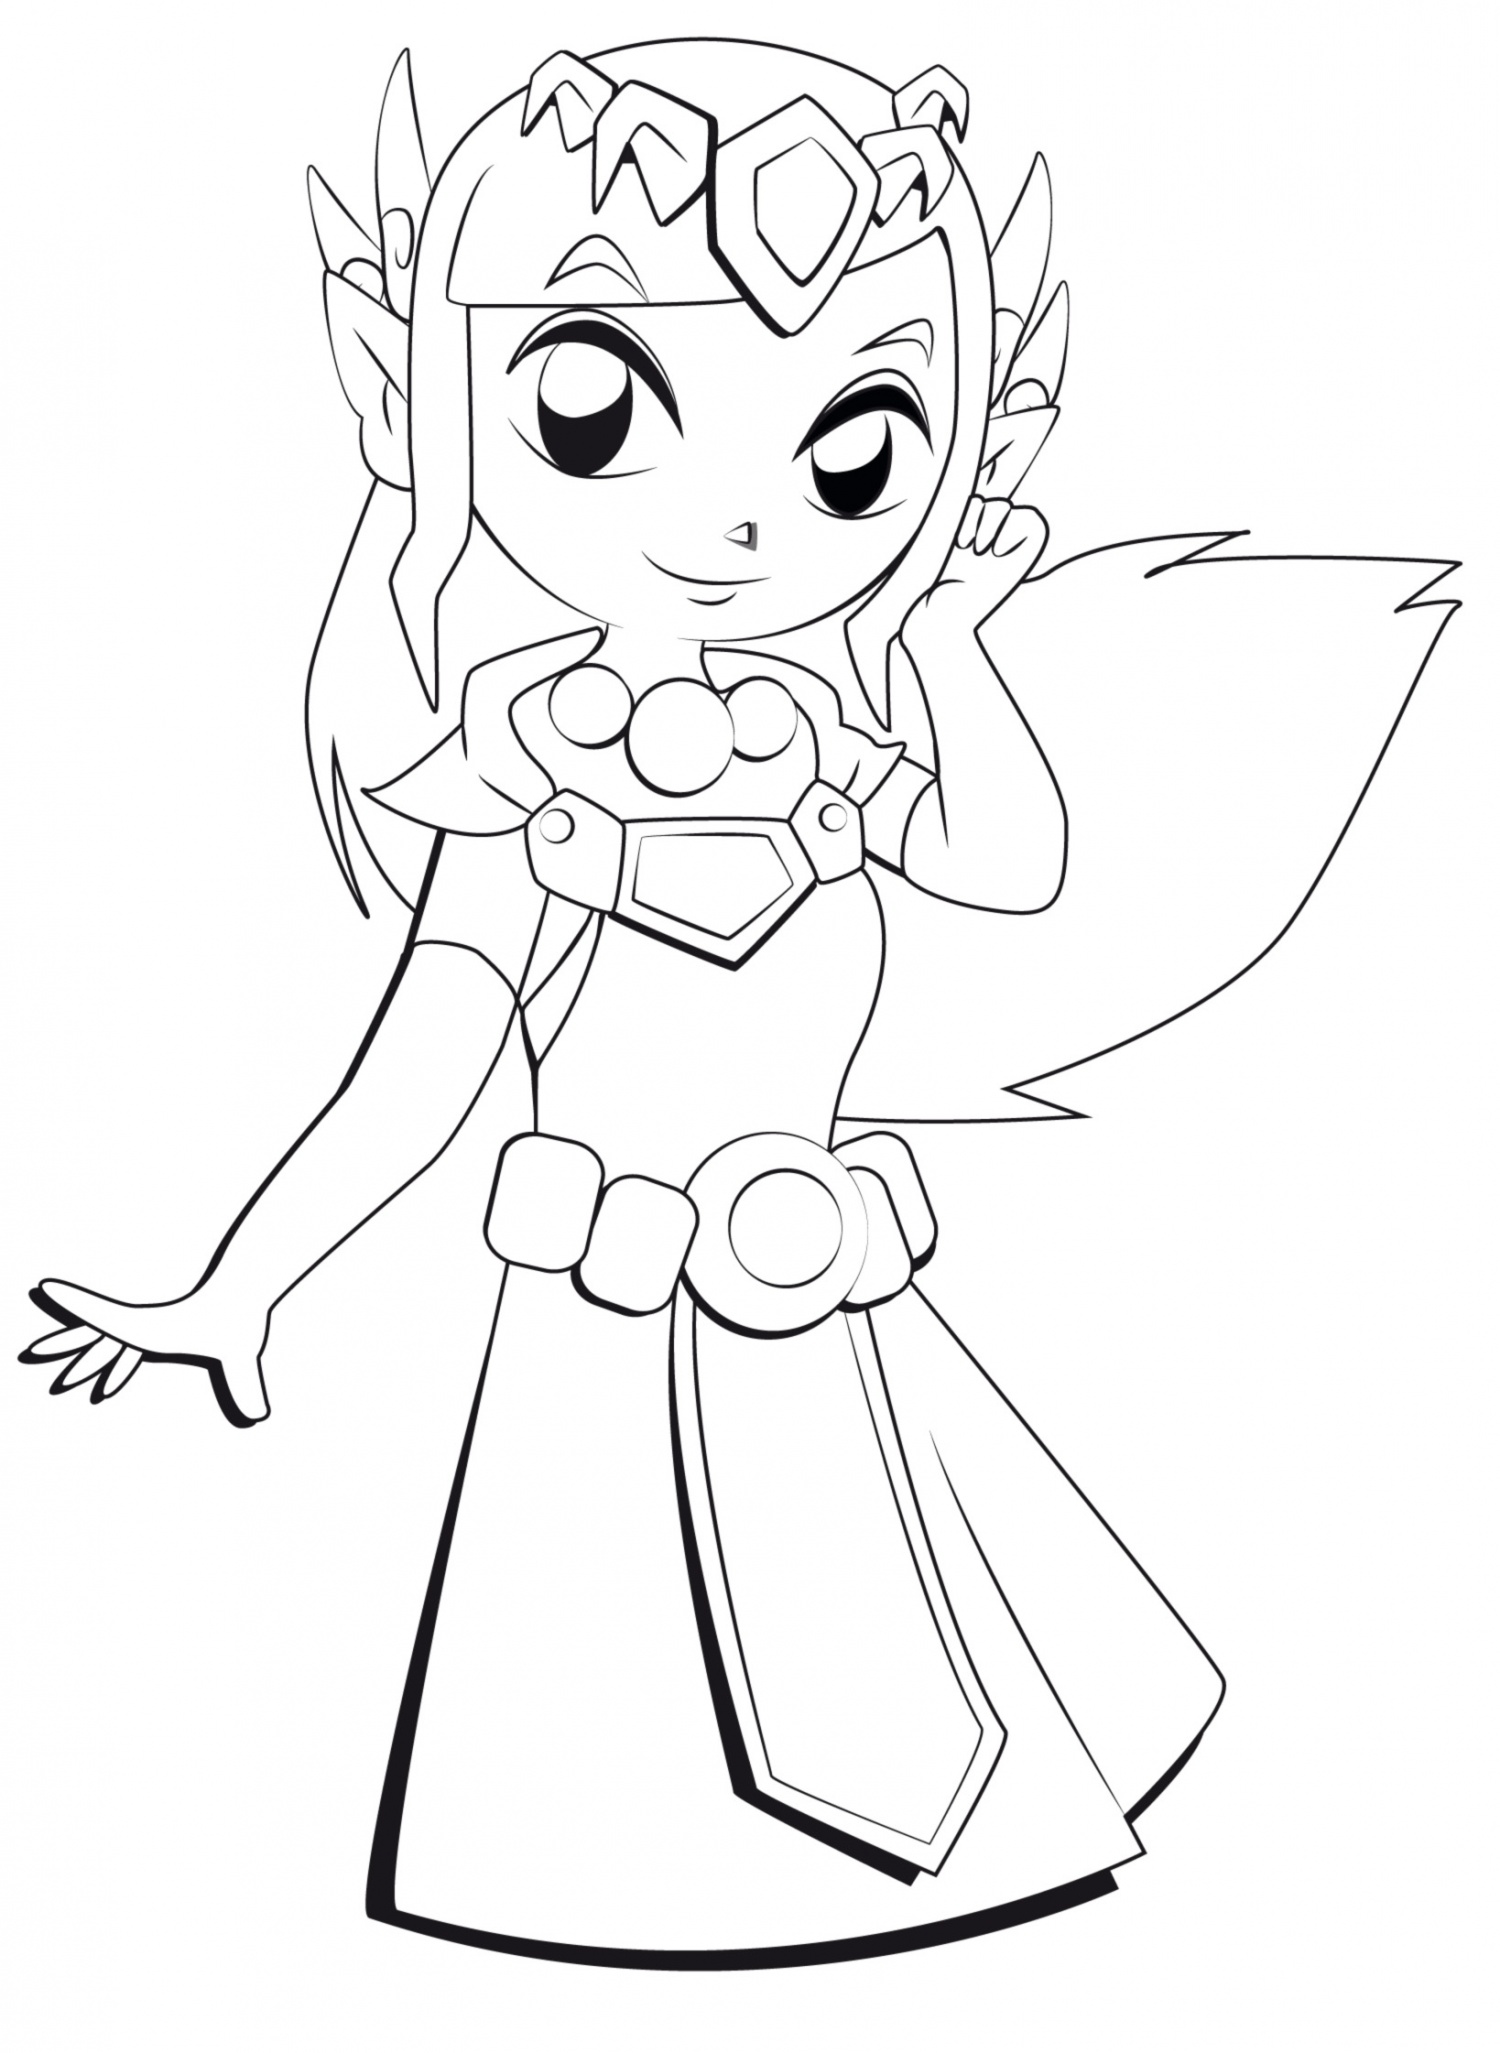 Zelda Coloring Pages Printable for Free Download